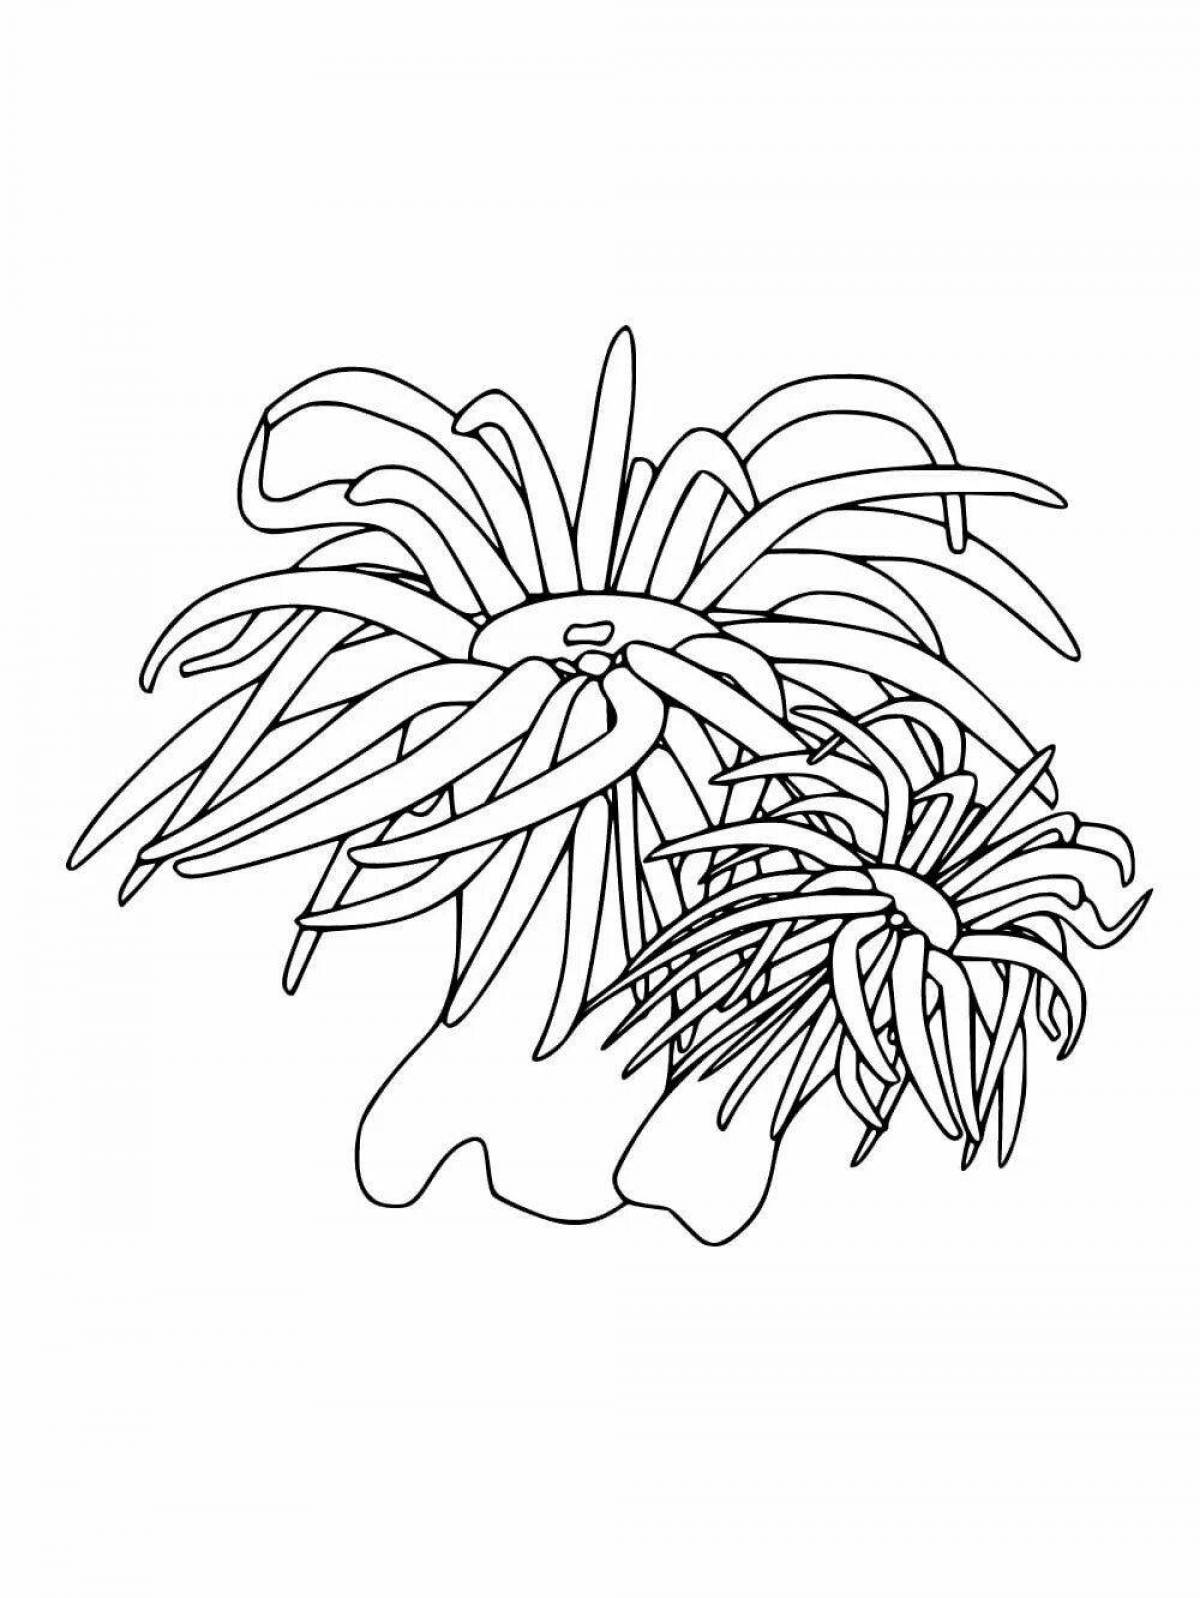 Colorful sea lily coloring page